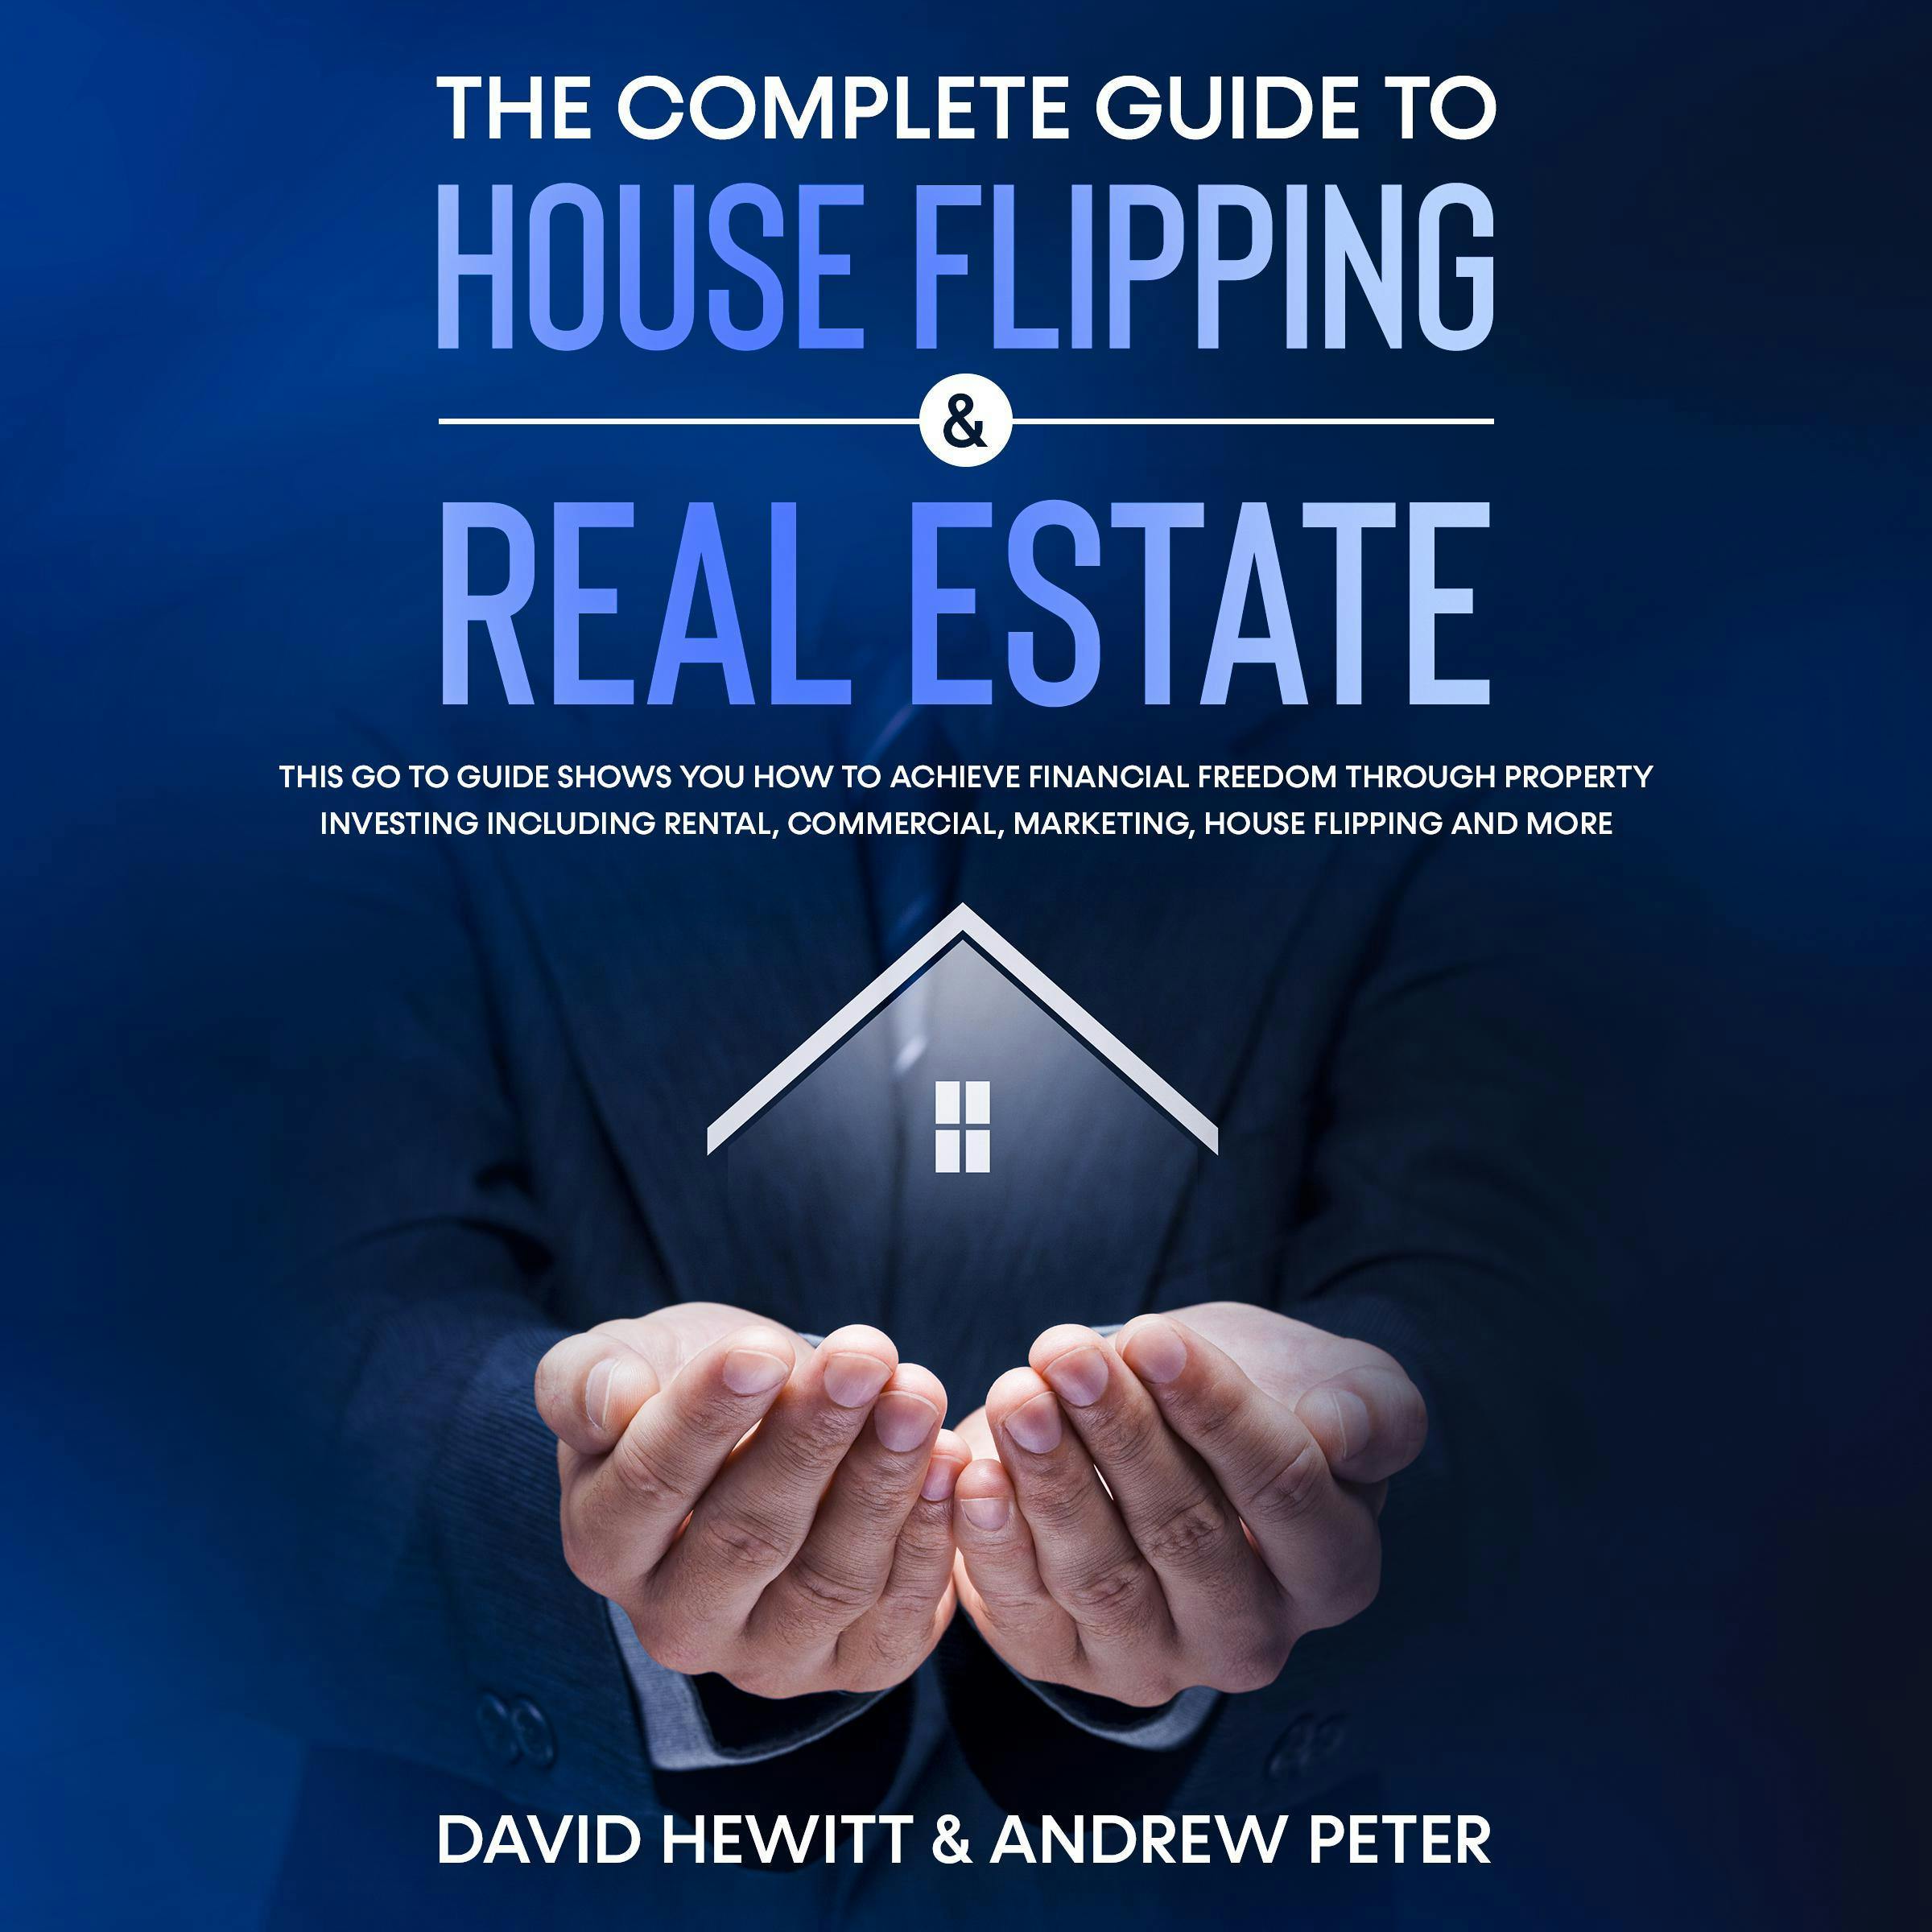 The complete Guide to House Flipping & Real Estate: This go to guide shows you how to achieve financial freedom through property investing including rental, commercial, marketing, house flipping and more - undefined